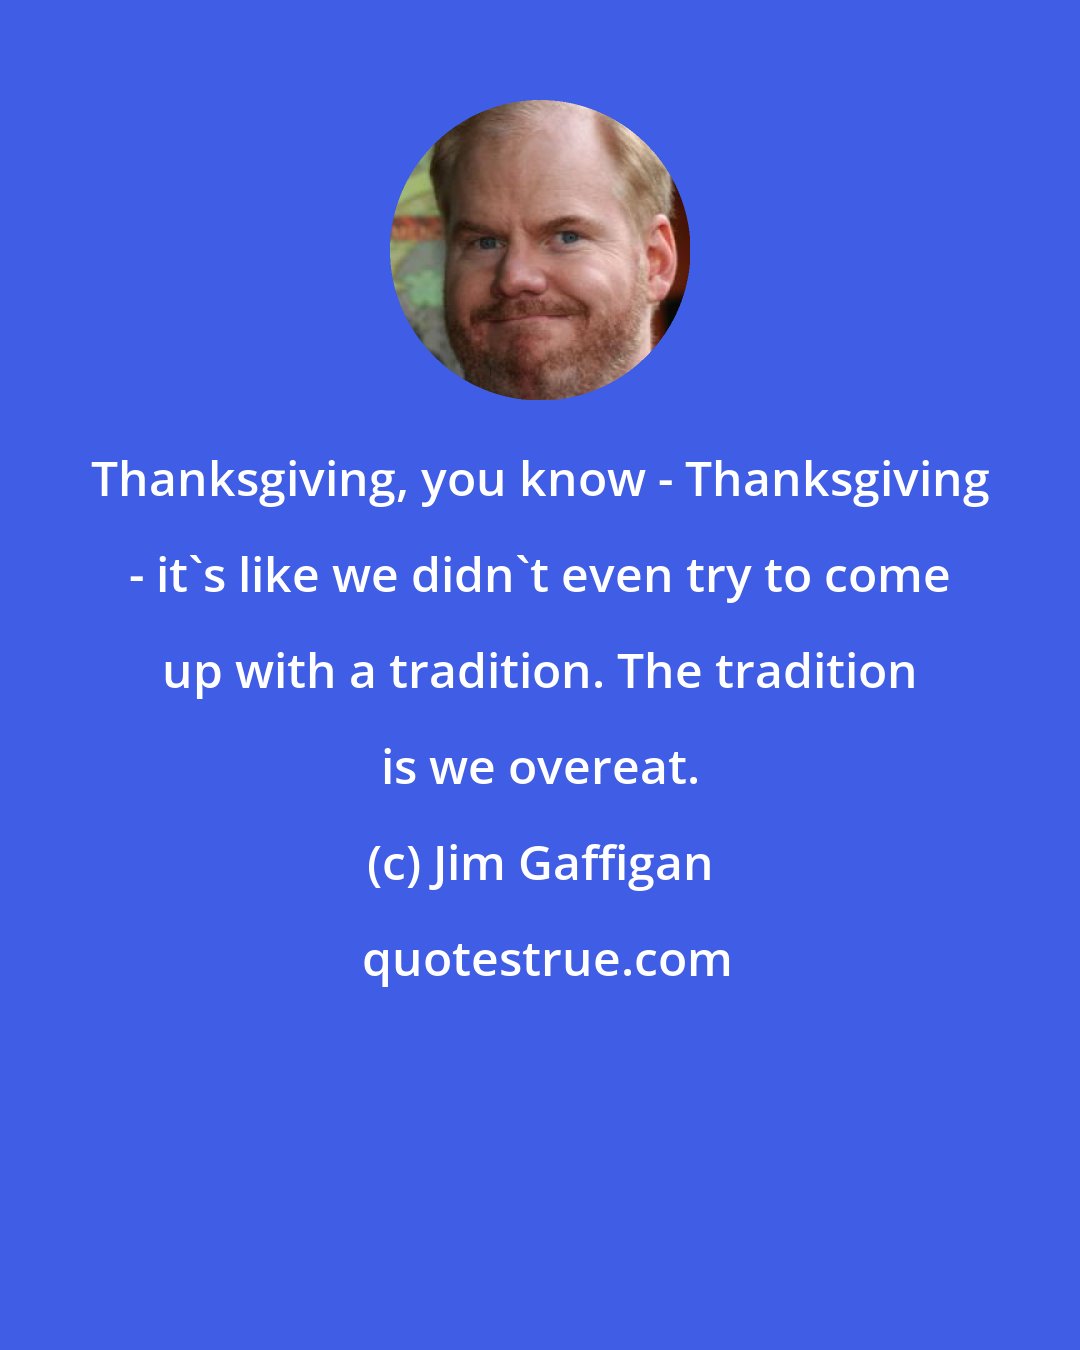 Jim Gaffigan: Thanksgiving, you know - Thanksgiving - it's like we didn't even try to come up with a tradition. The tradition is we overeat.